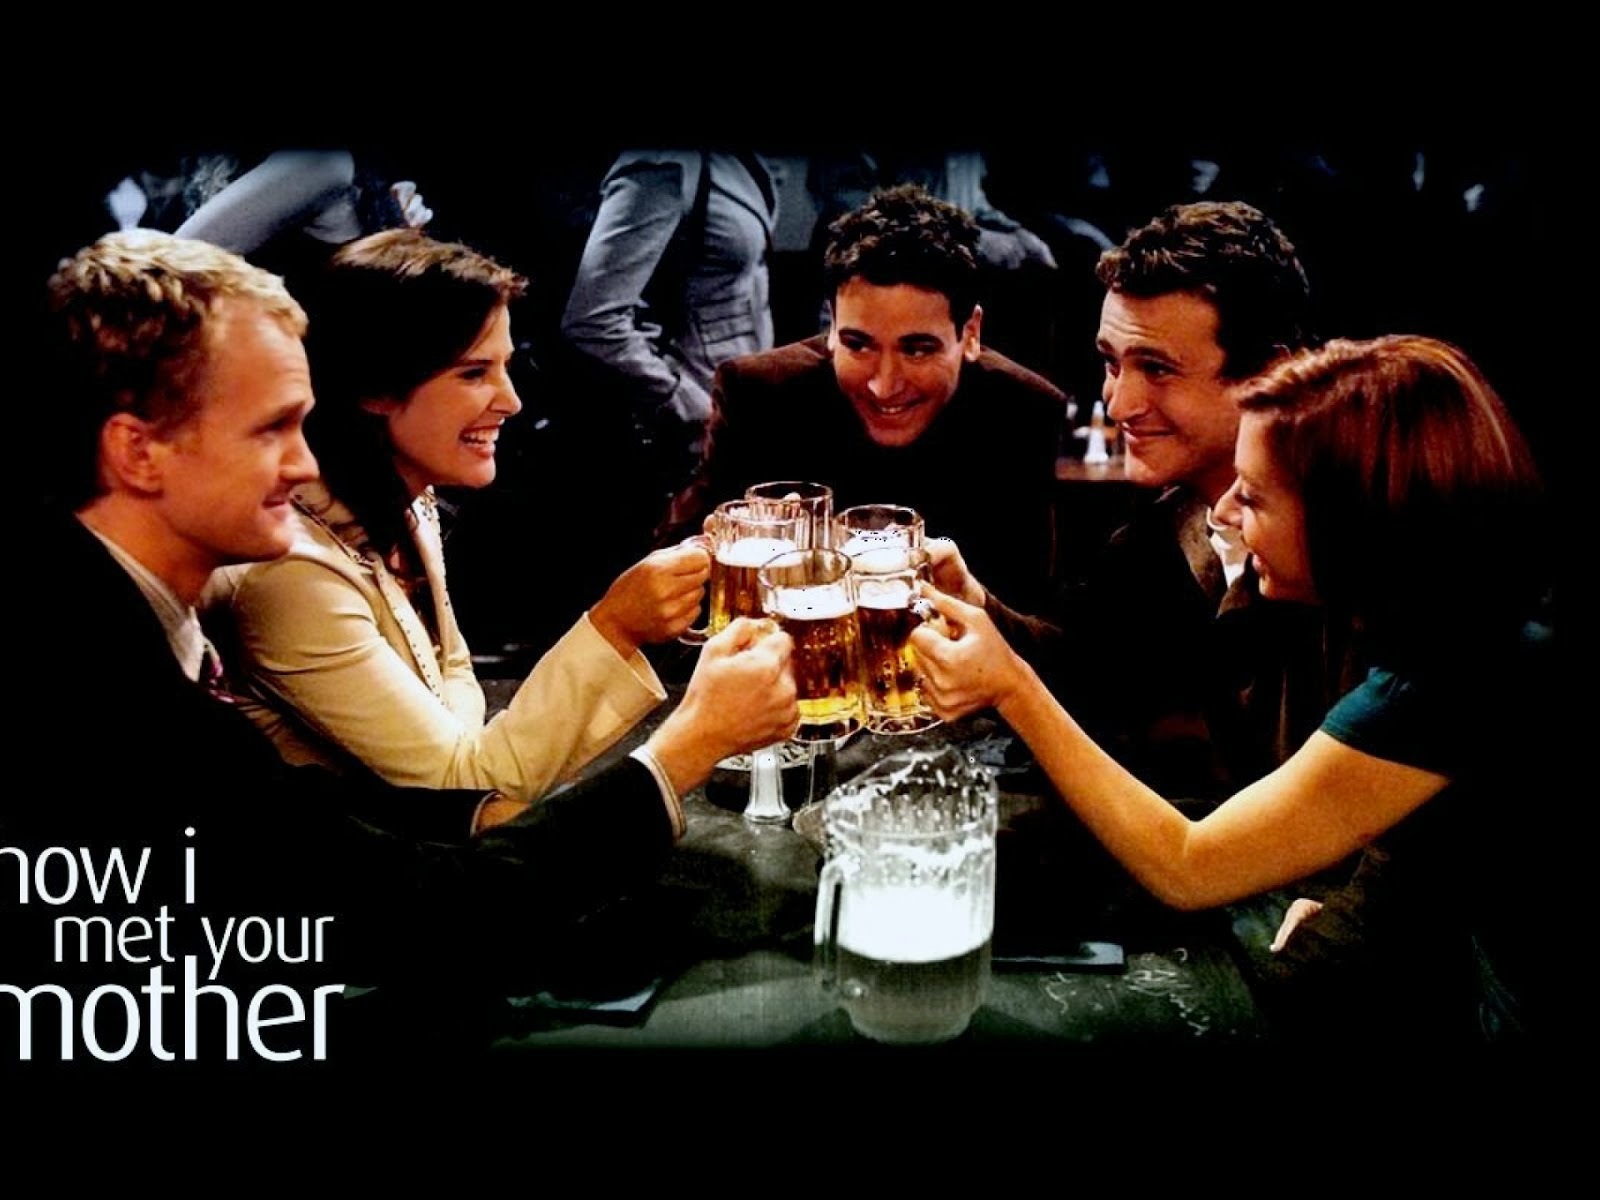 how i met your mother wallpapers,alcohol,fun,human,human body,event